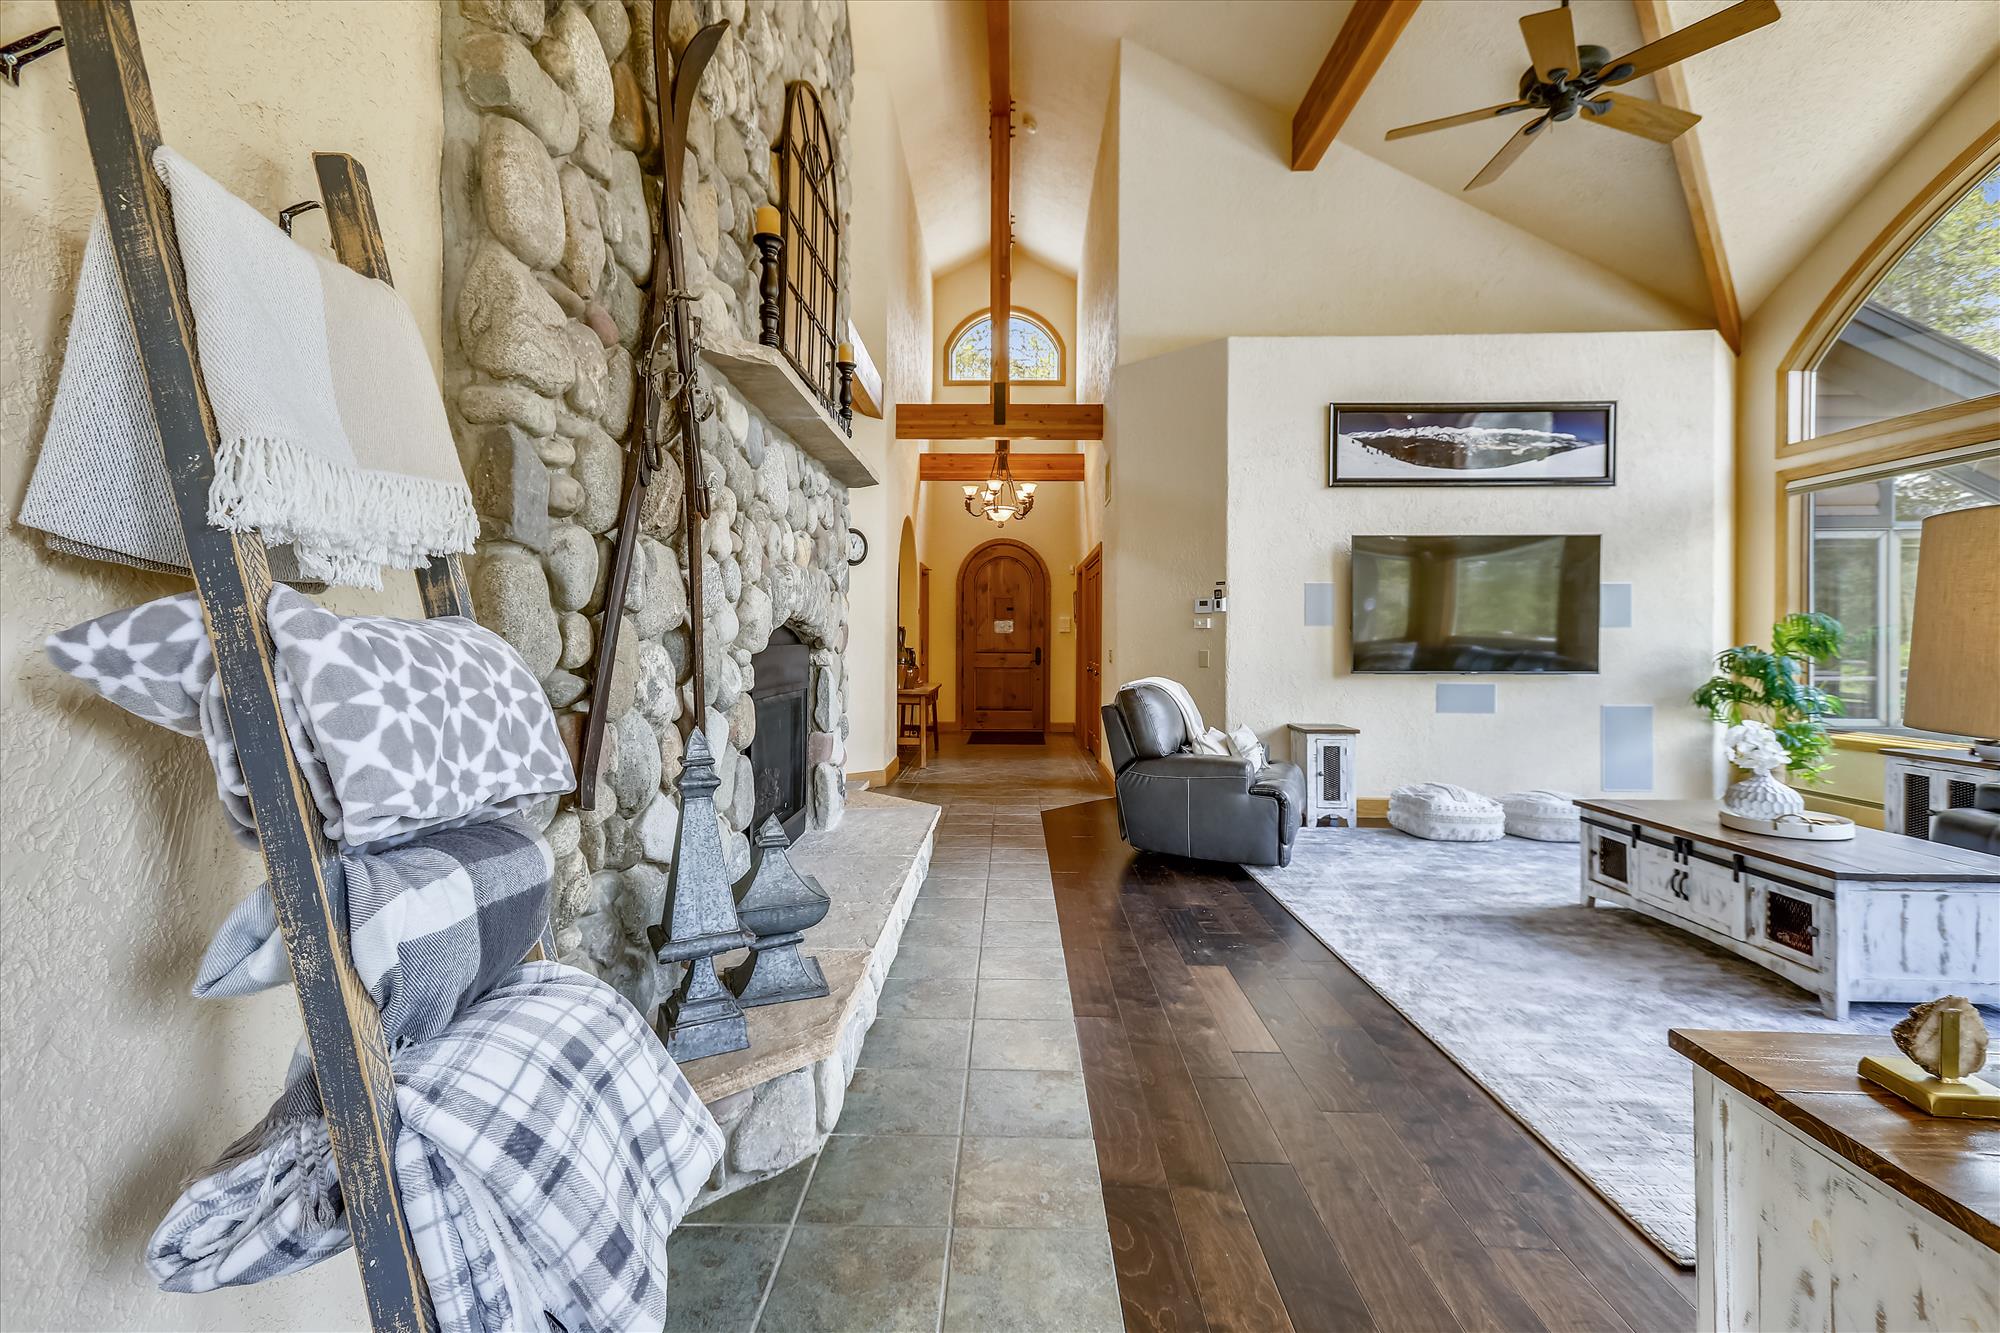 Grand main entry and walkway to the kitchen - Evergreen Lodge Breckenridge Vacation Rental